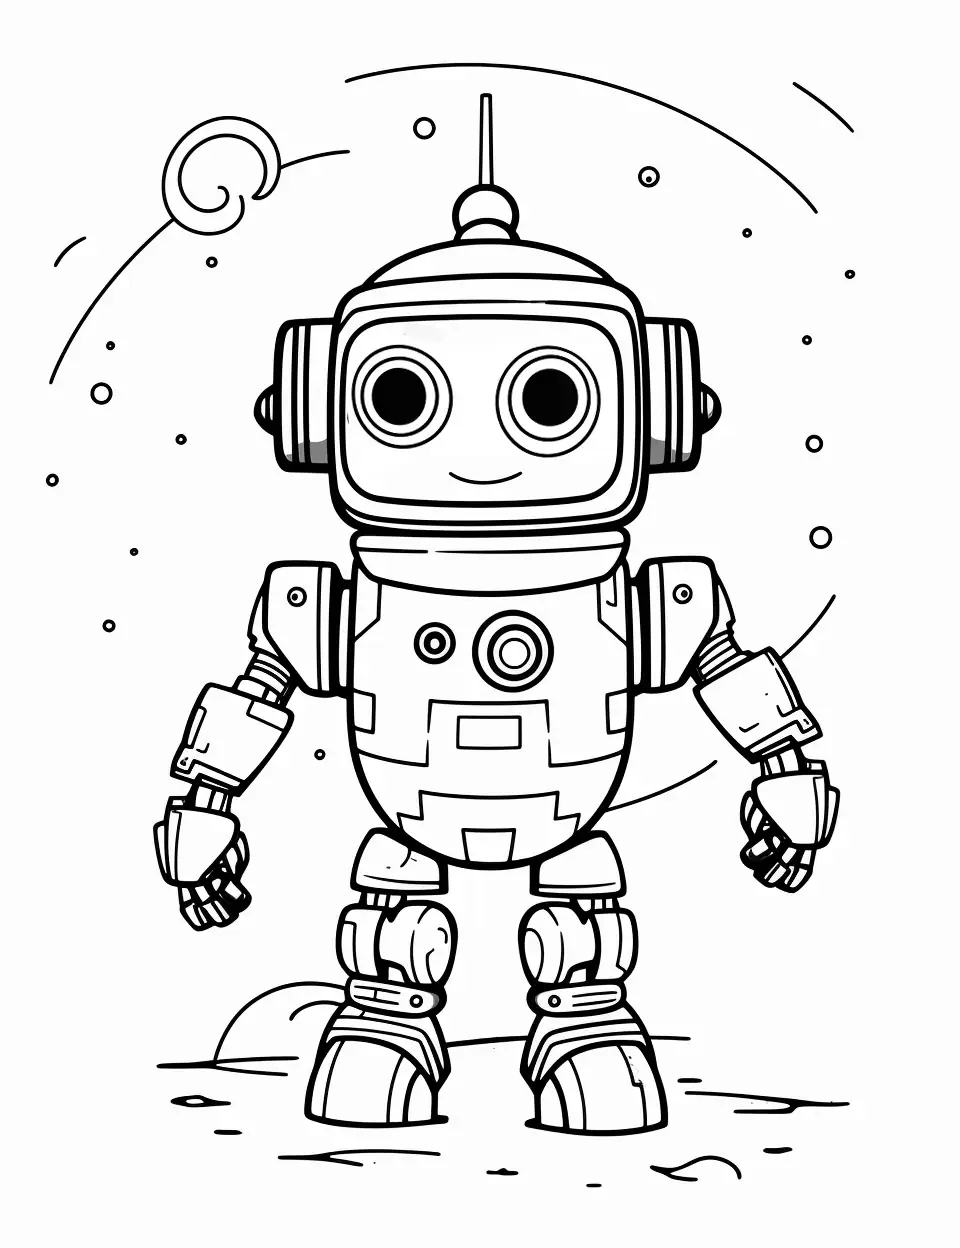 Space Robot on a Moon Mission Coloring Page - A robot to conduct experiments on the moon.